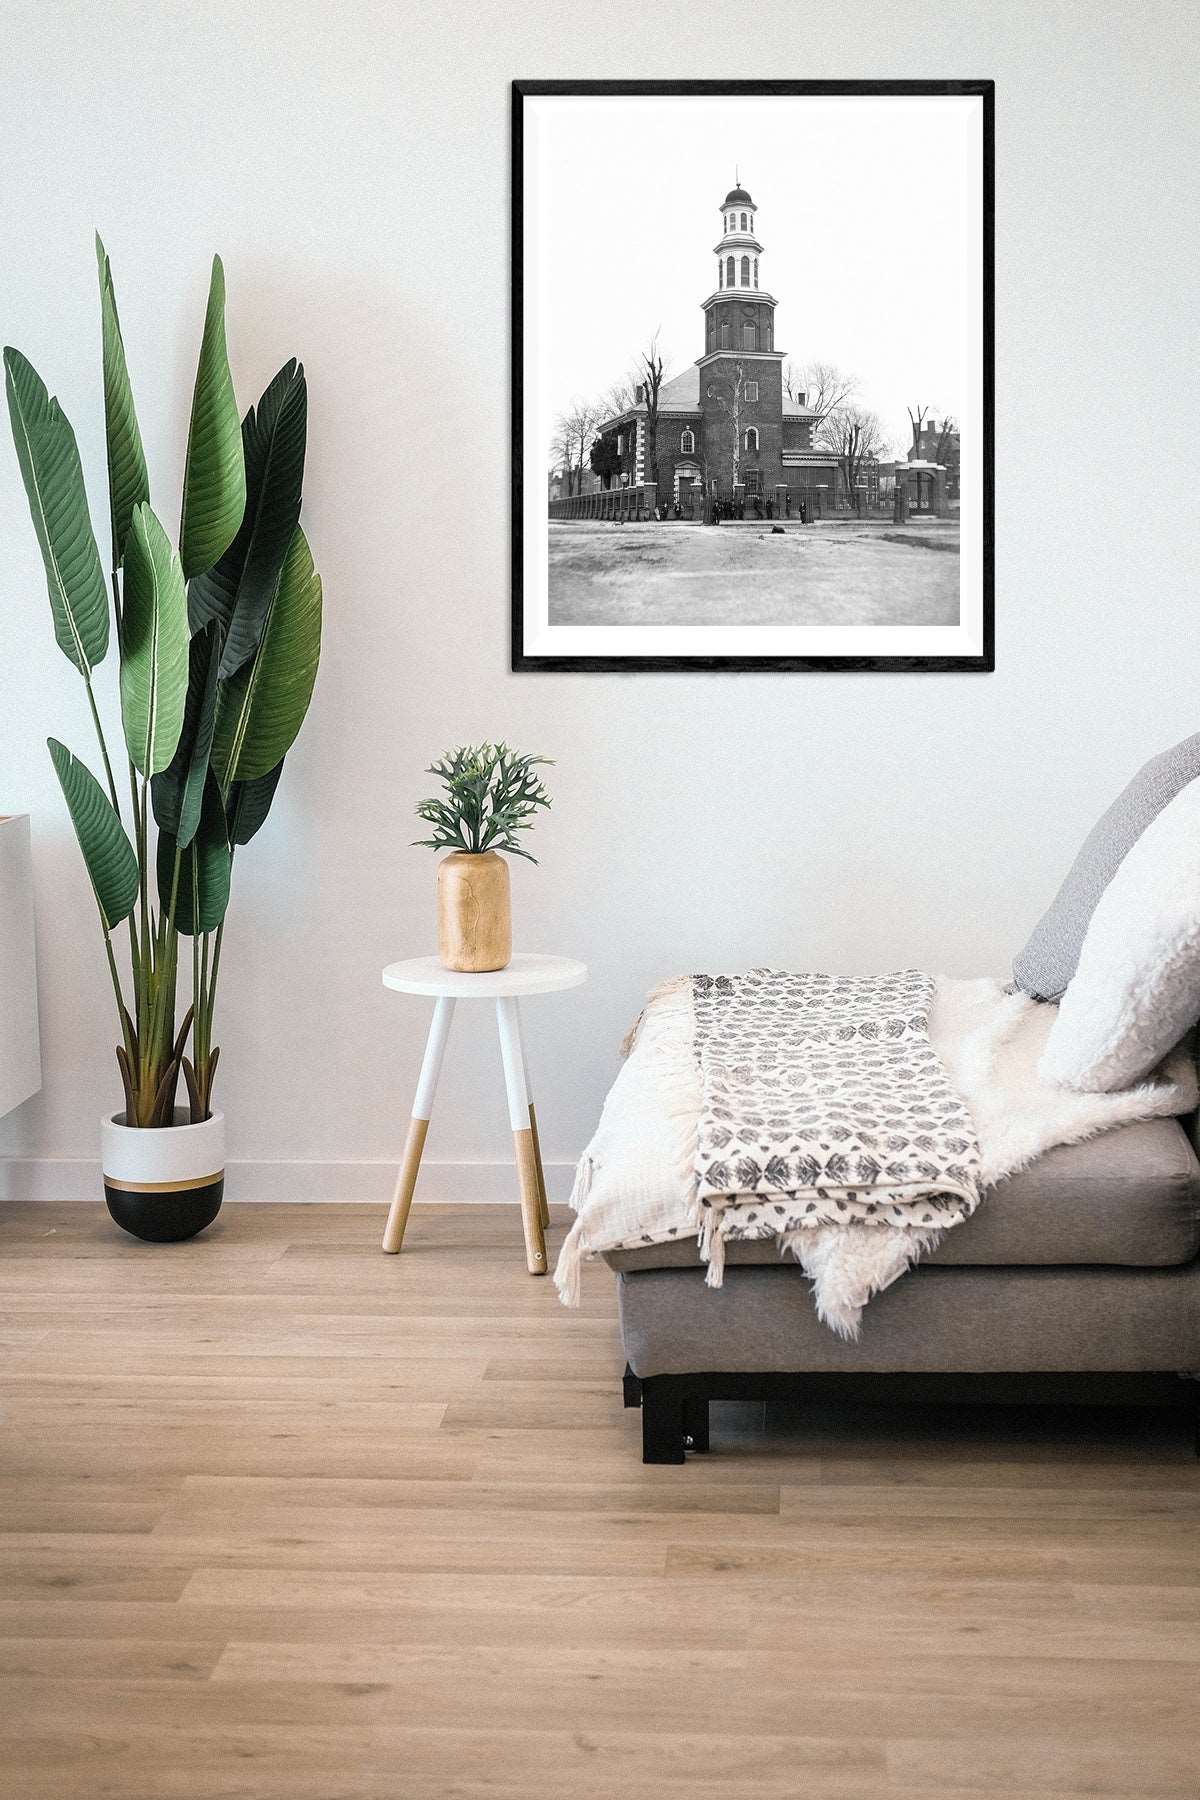 A photo of a living room with a framed print on the wall, featuring vintage photography